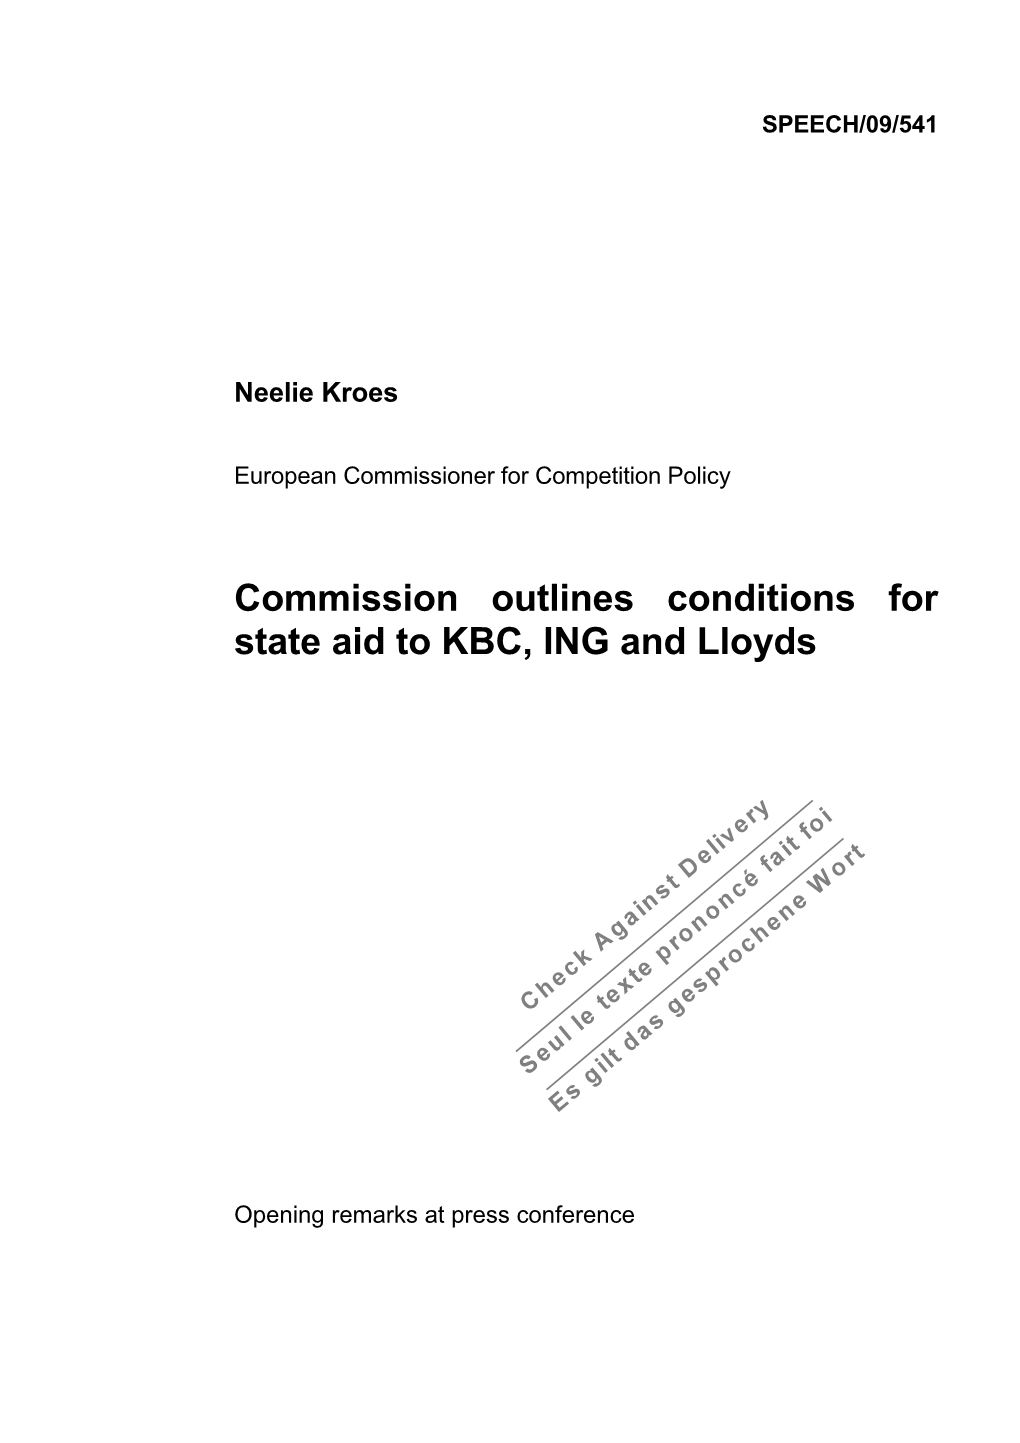 Commission Outlines Conditions for State Aid to KBC,ING and Lloyds